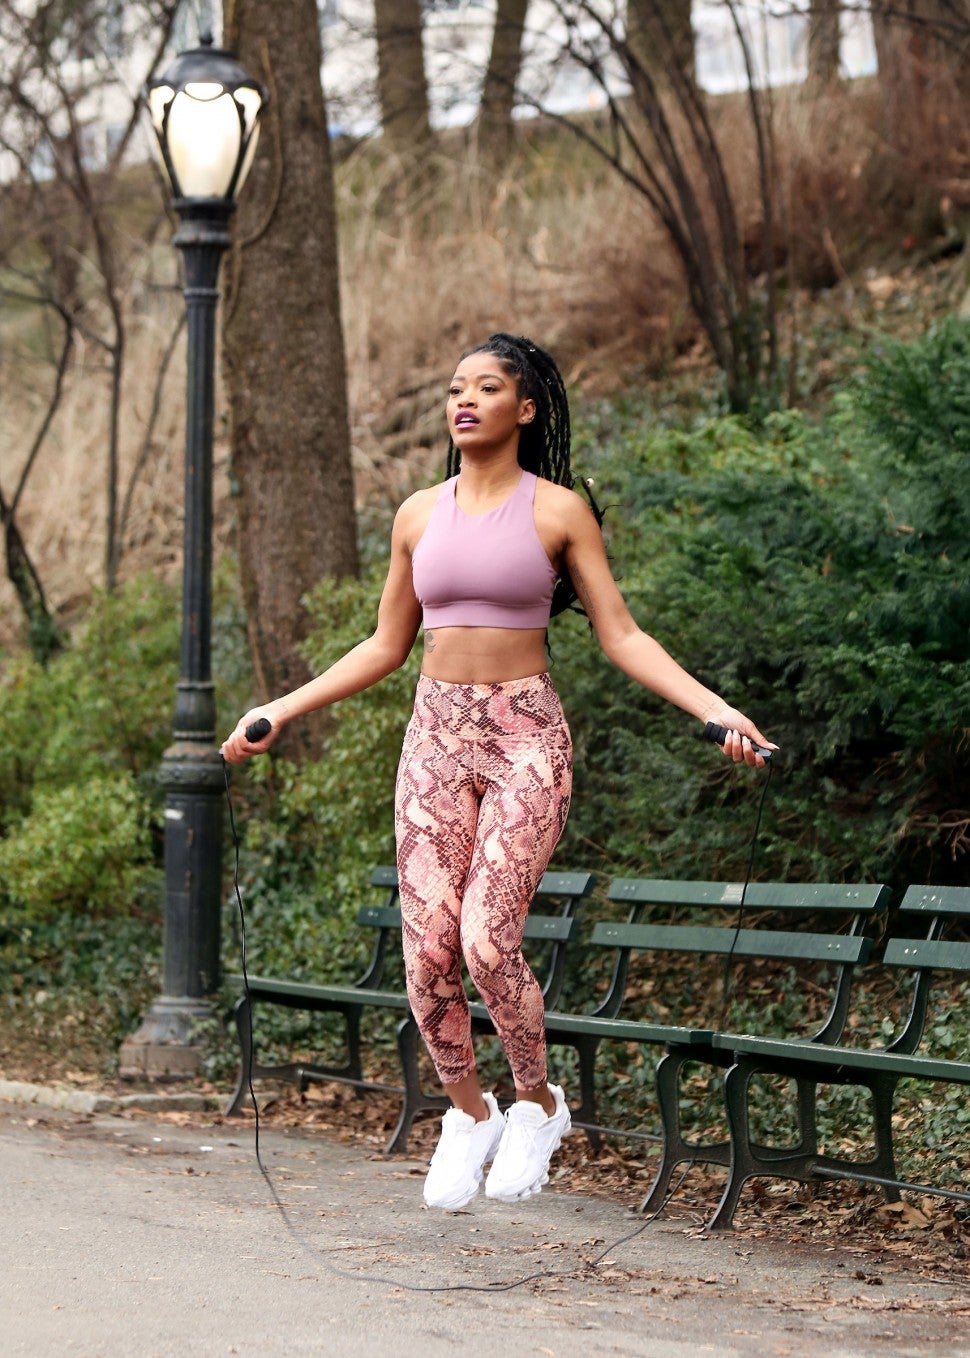 Keke Palmer in Old Navy leggings working out in Central Park